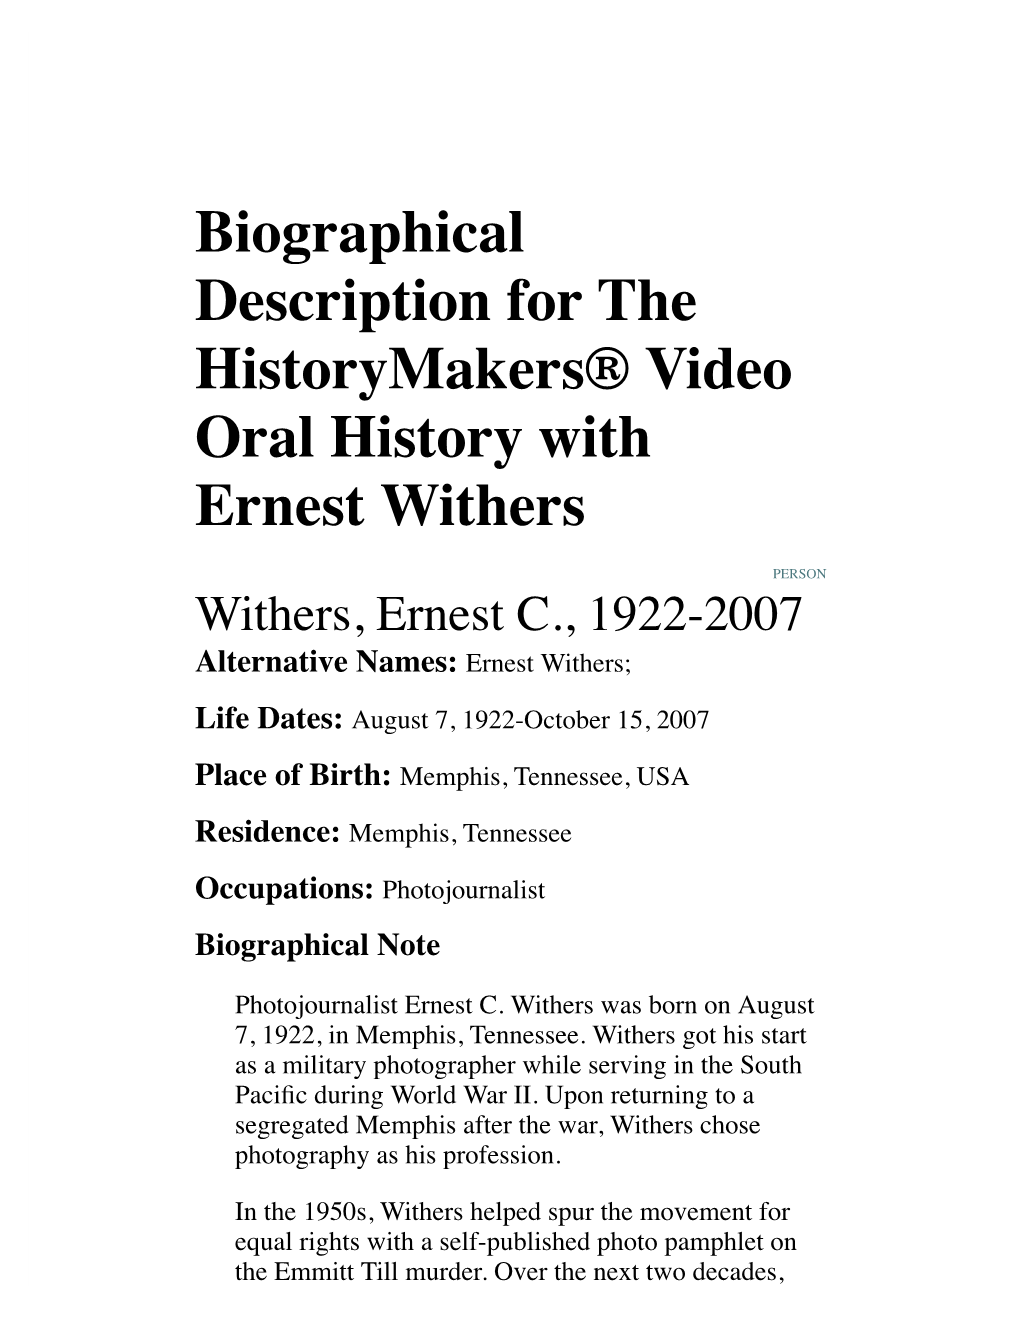 Biographical Description for the Historymakers® Video Oral History with Ernest Withers